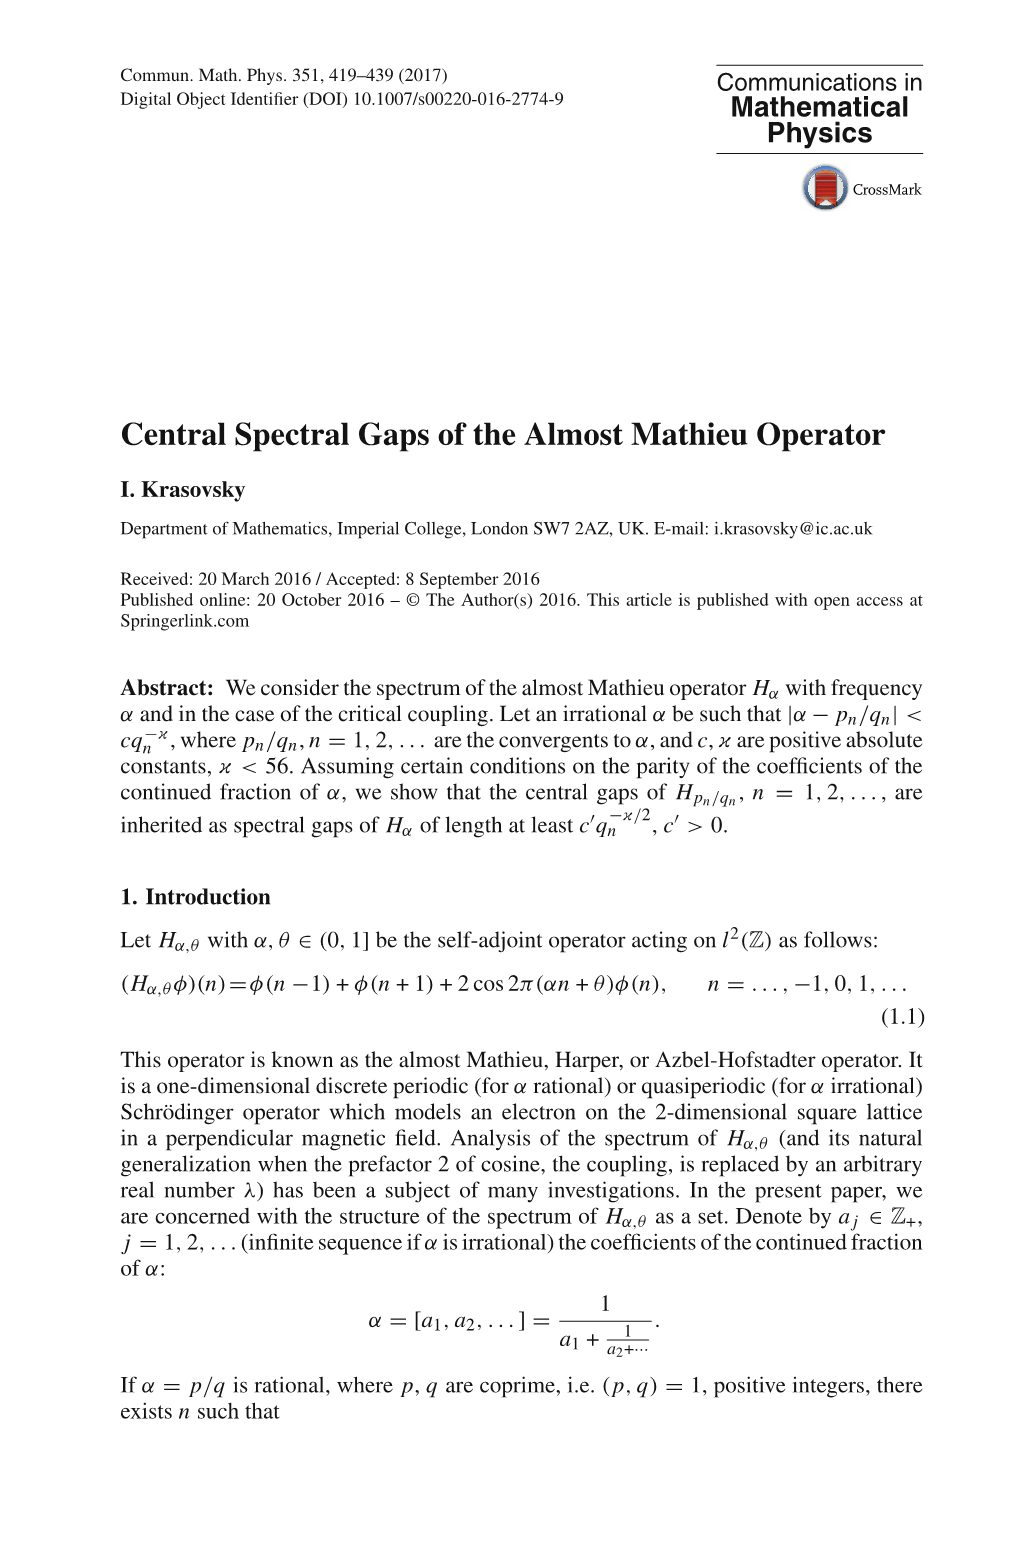 Central Spectral Gaps of the Almost Mathieu Operator